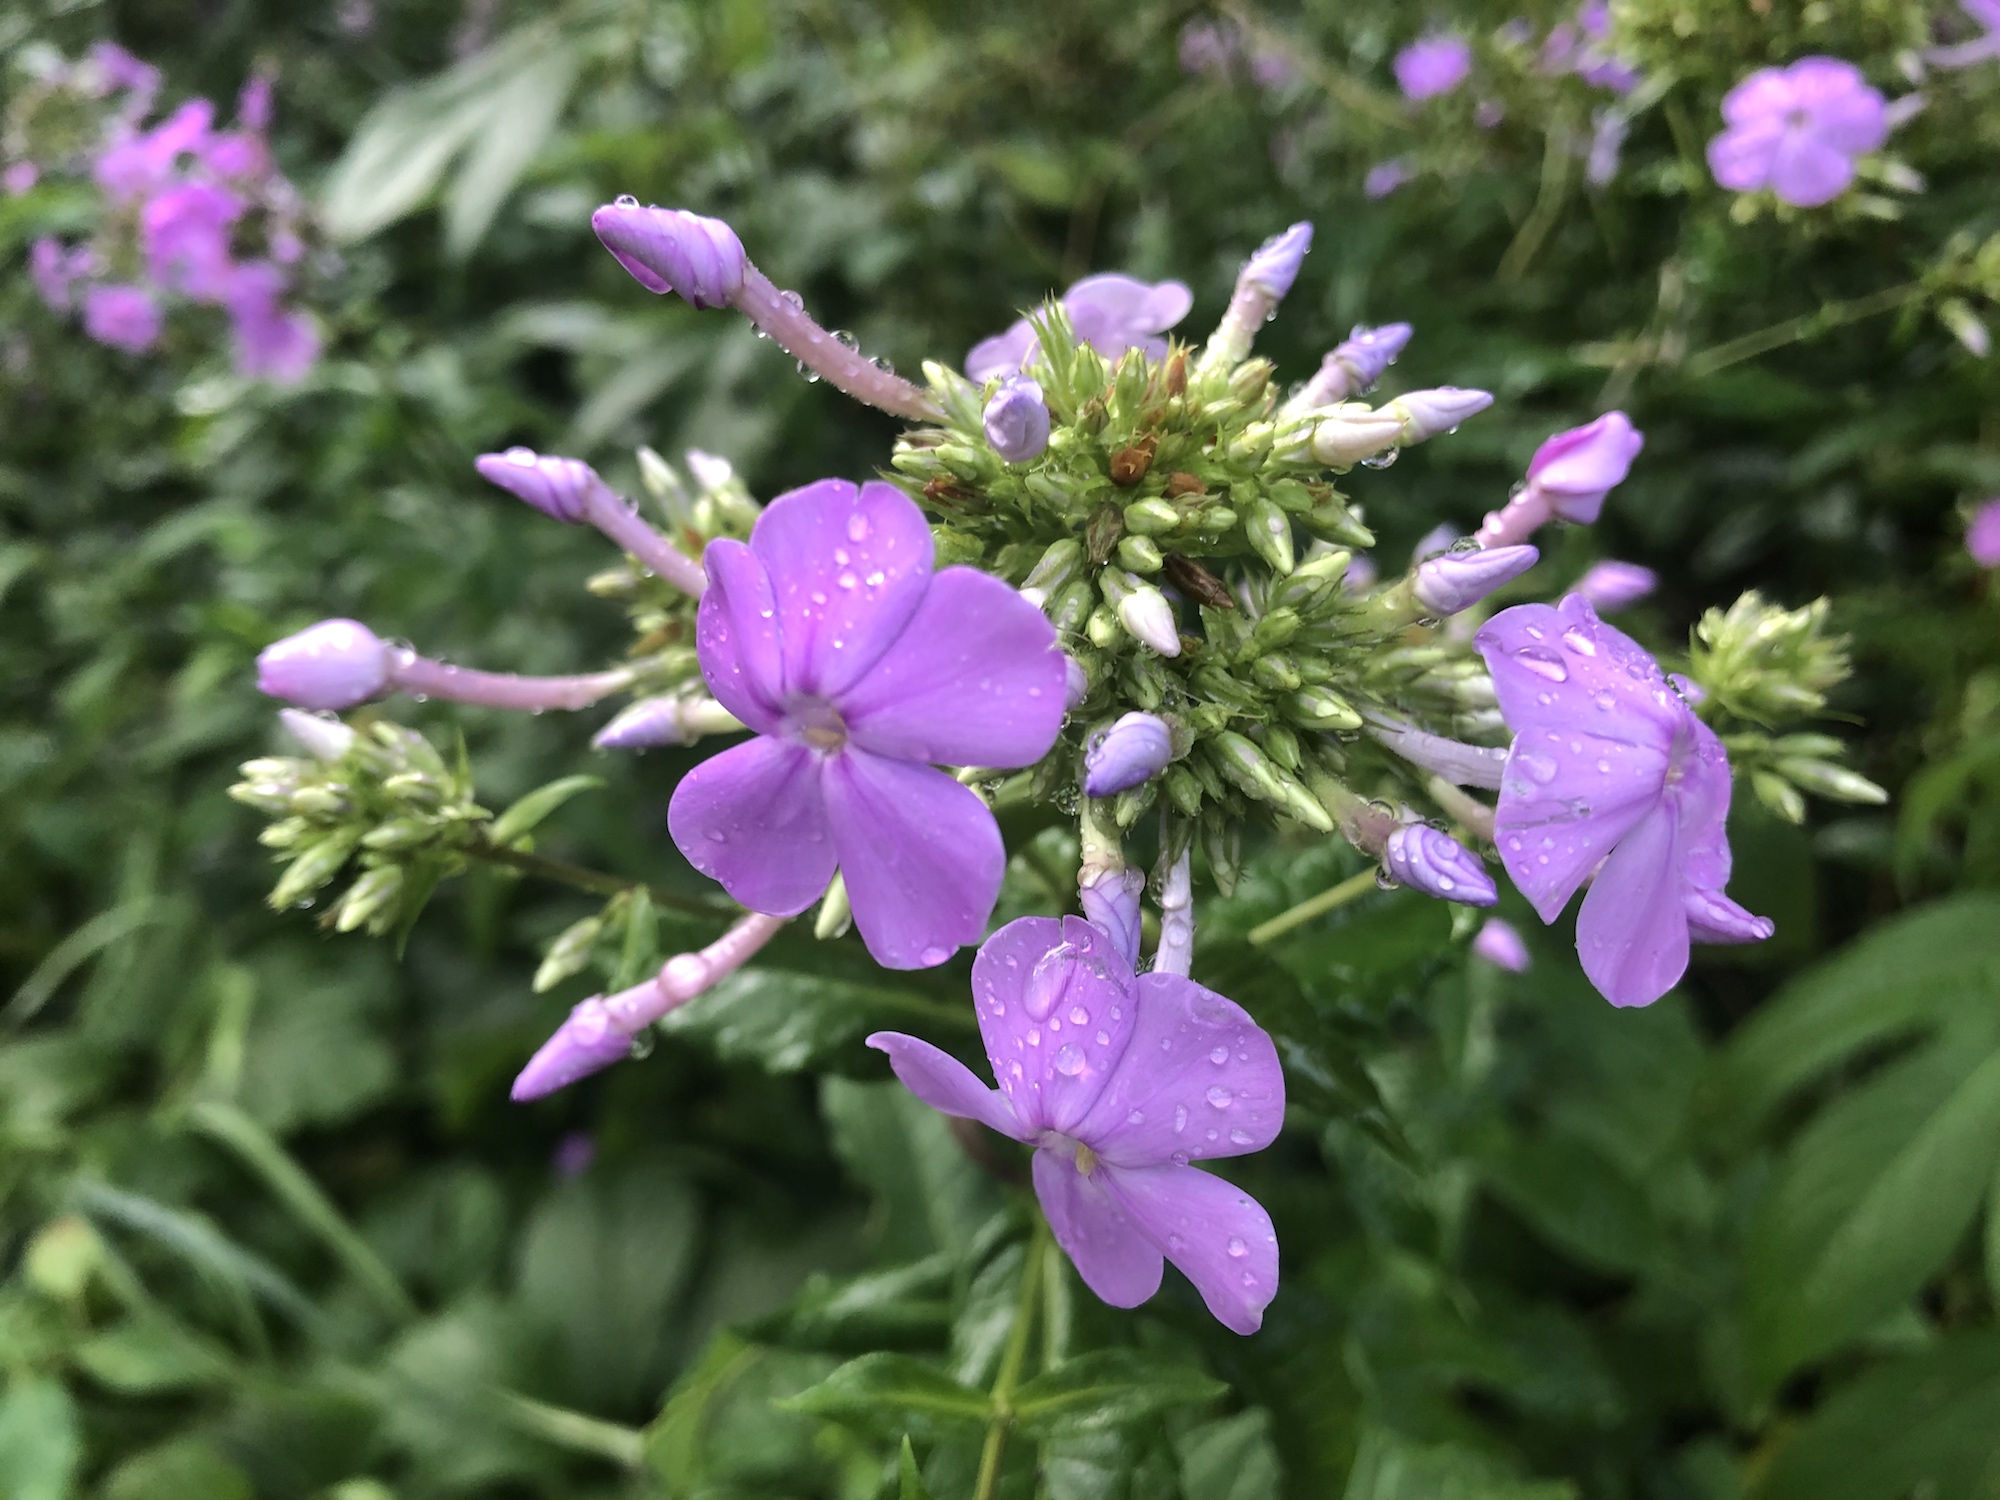 Tall Garden Phlox by Duck Pond on July 29, 2019.